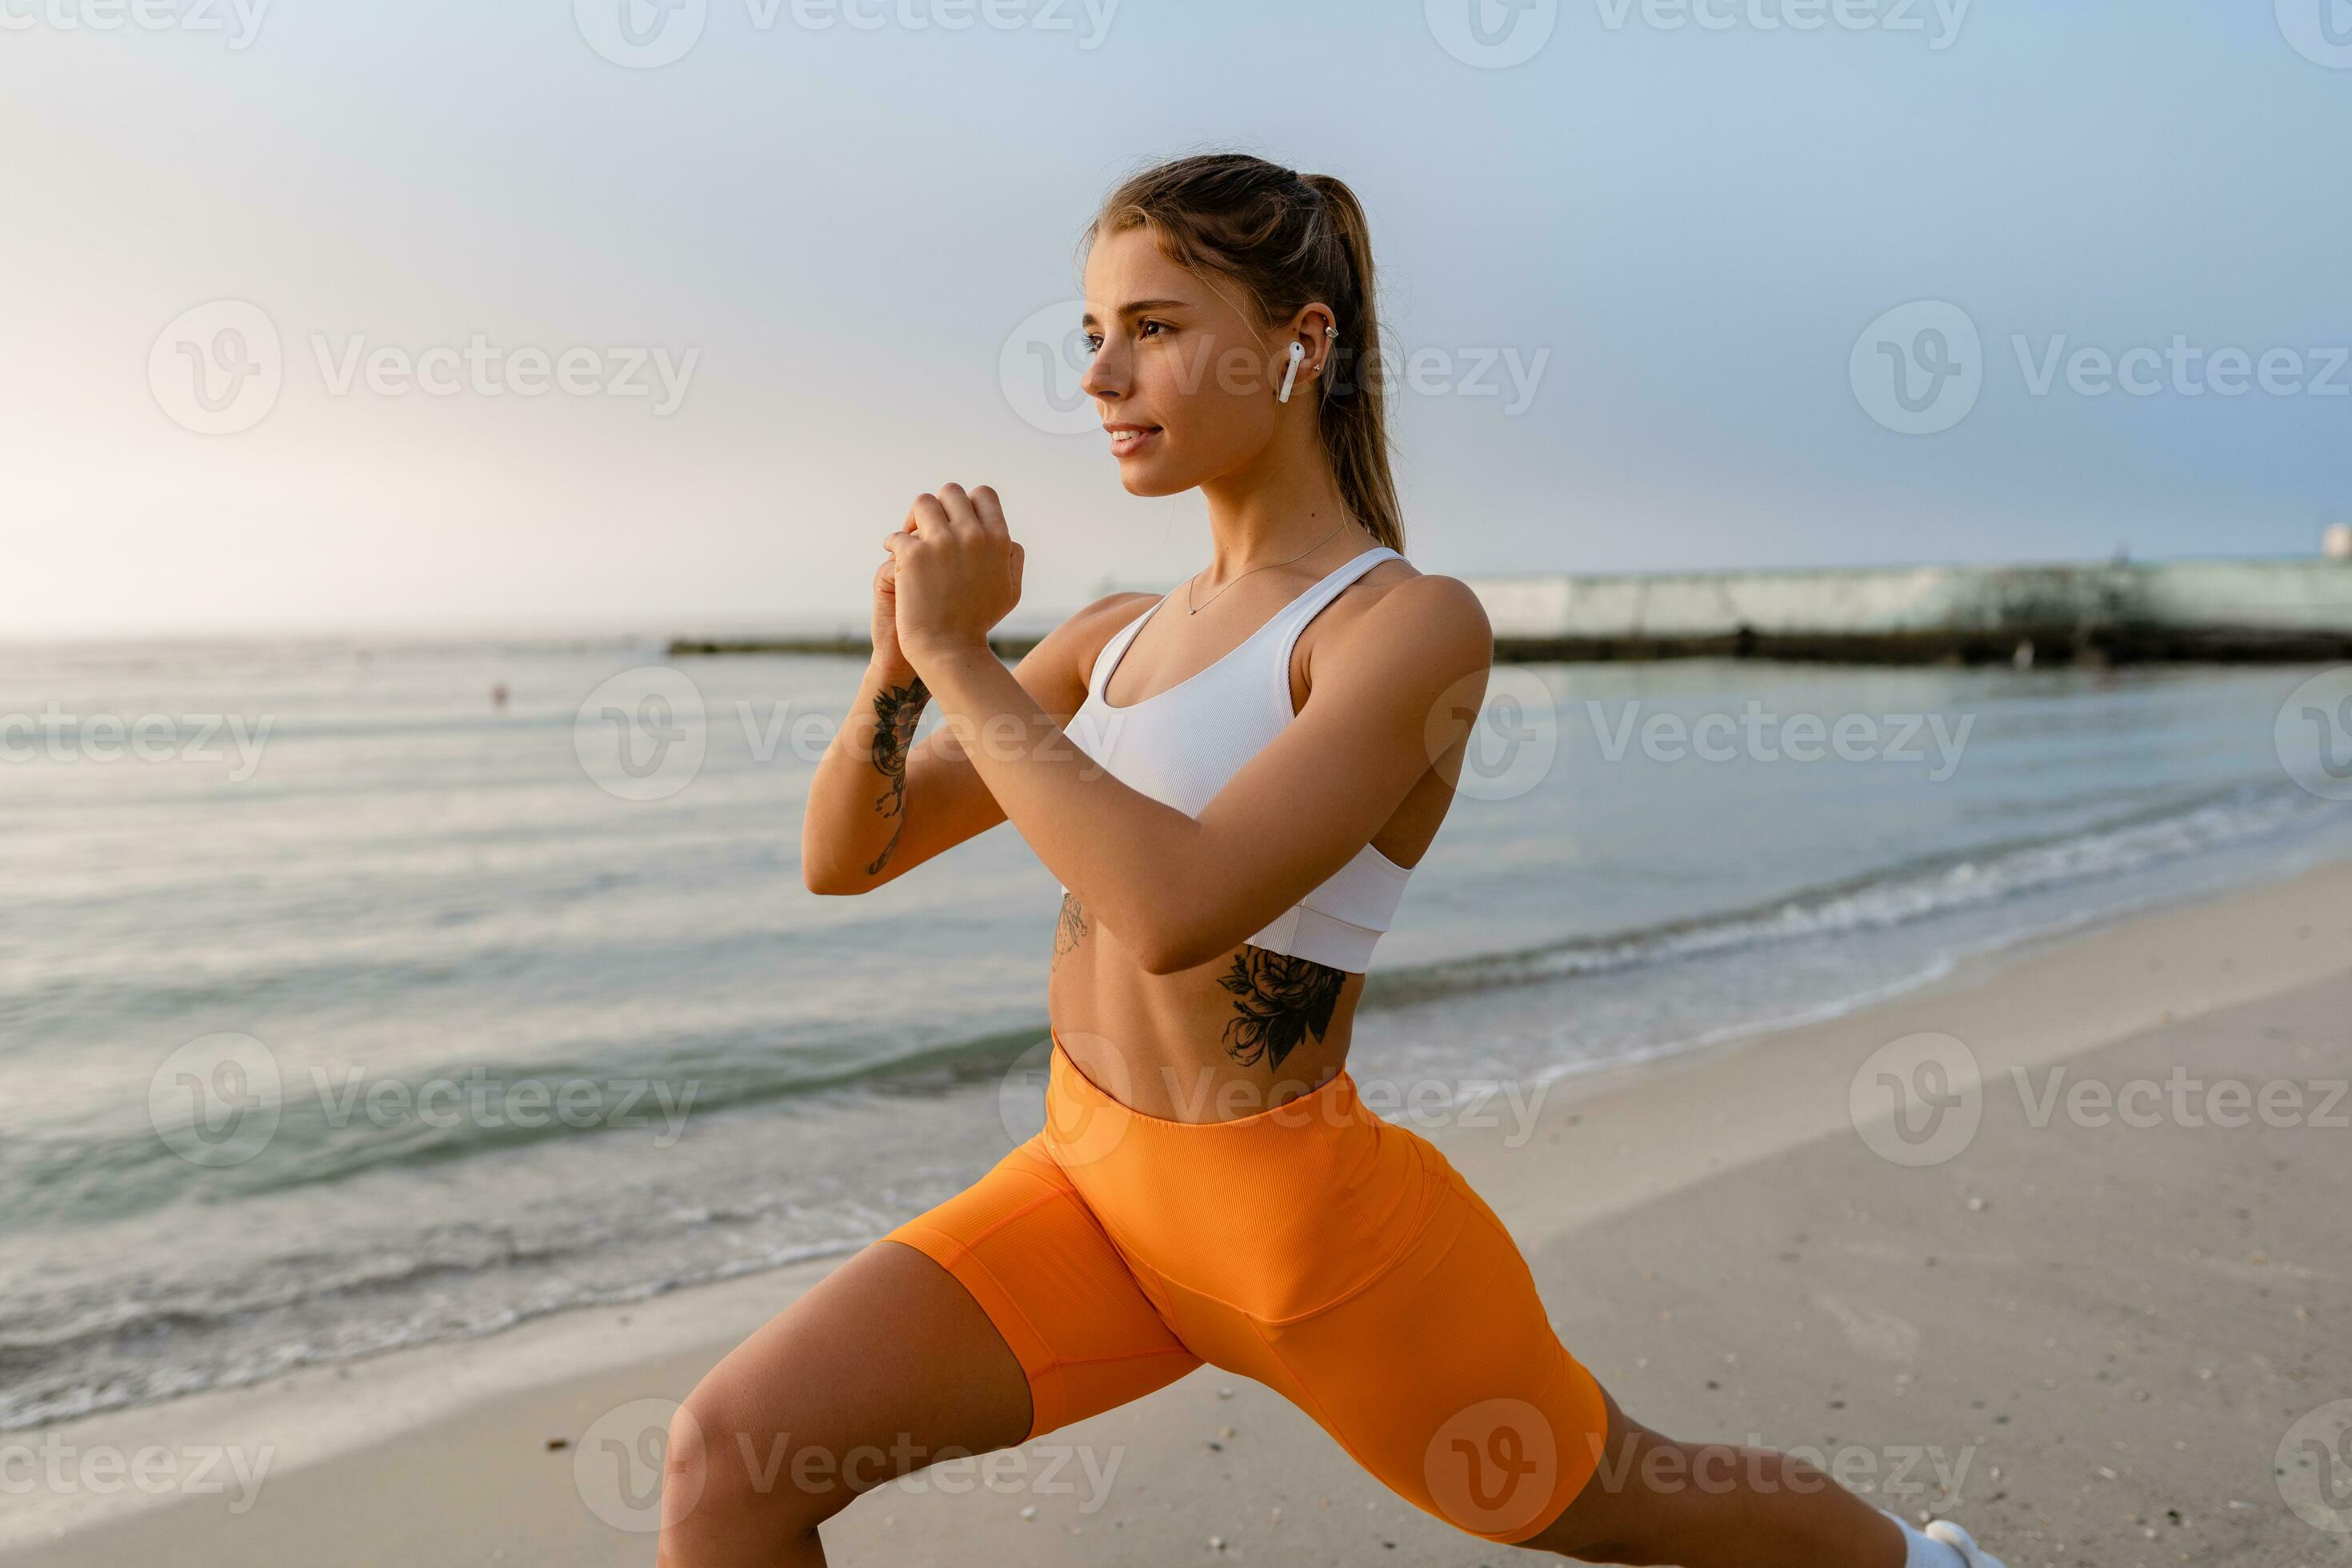 https://static.vecteezy.com/system/resources/previews/029/068/860/large_2x/pretty-young-smiling-woman-doing-sports-in-the-morning-in-stylish-sport-outfit-sportswear-skinny-strong-body-healthy-fit-lifestyle-photo.jpg